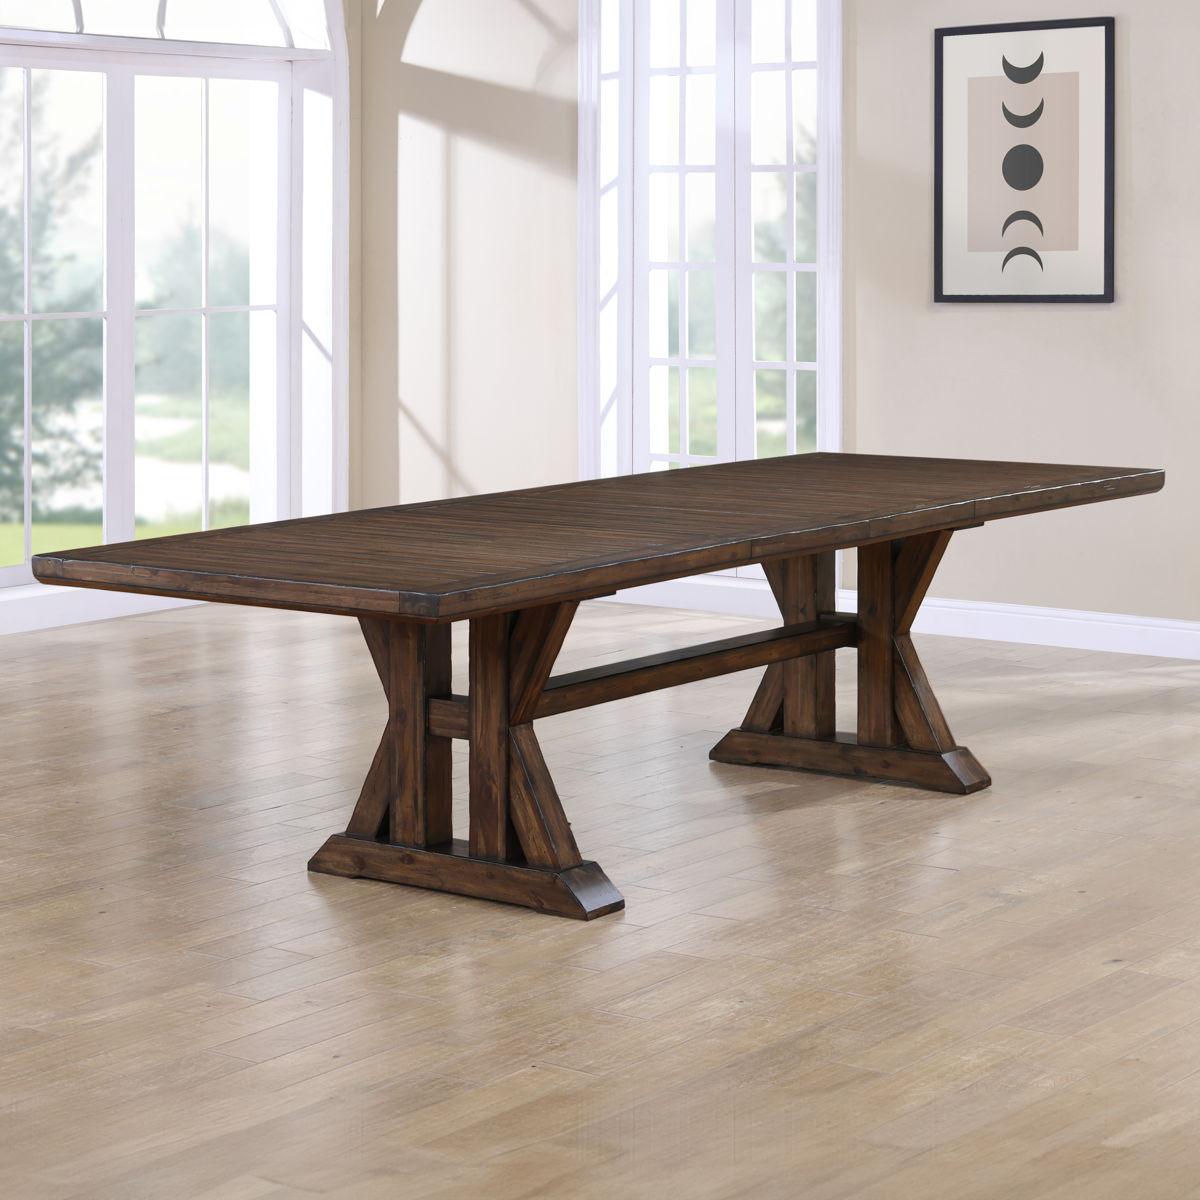 Steve Silver Furniture - Auburn - Table With 2 / 20" Table Leaves - Dark Brown - 5th Avenue Furniture